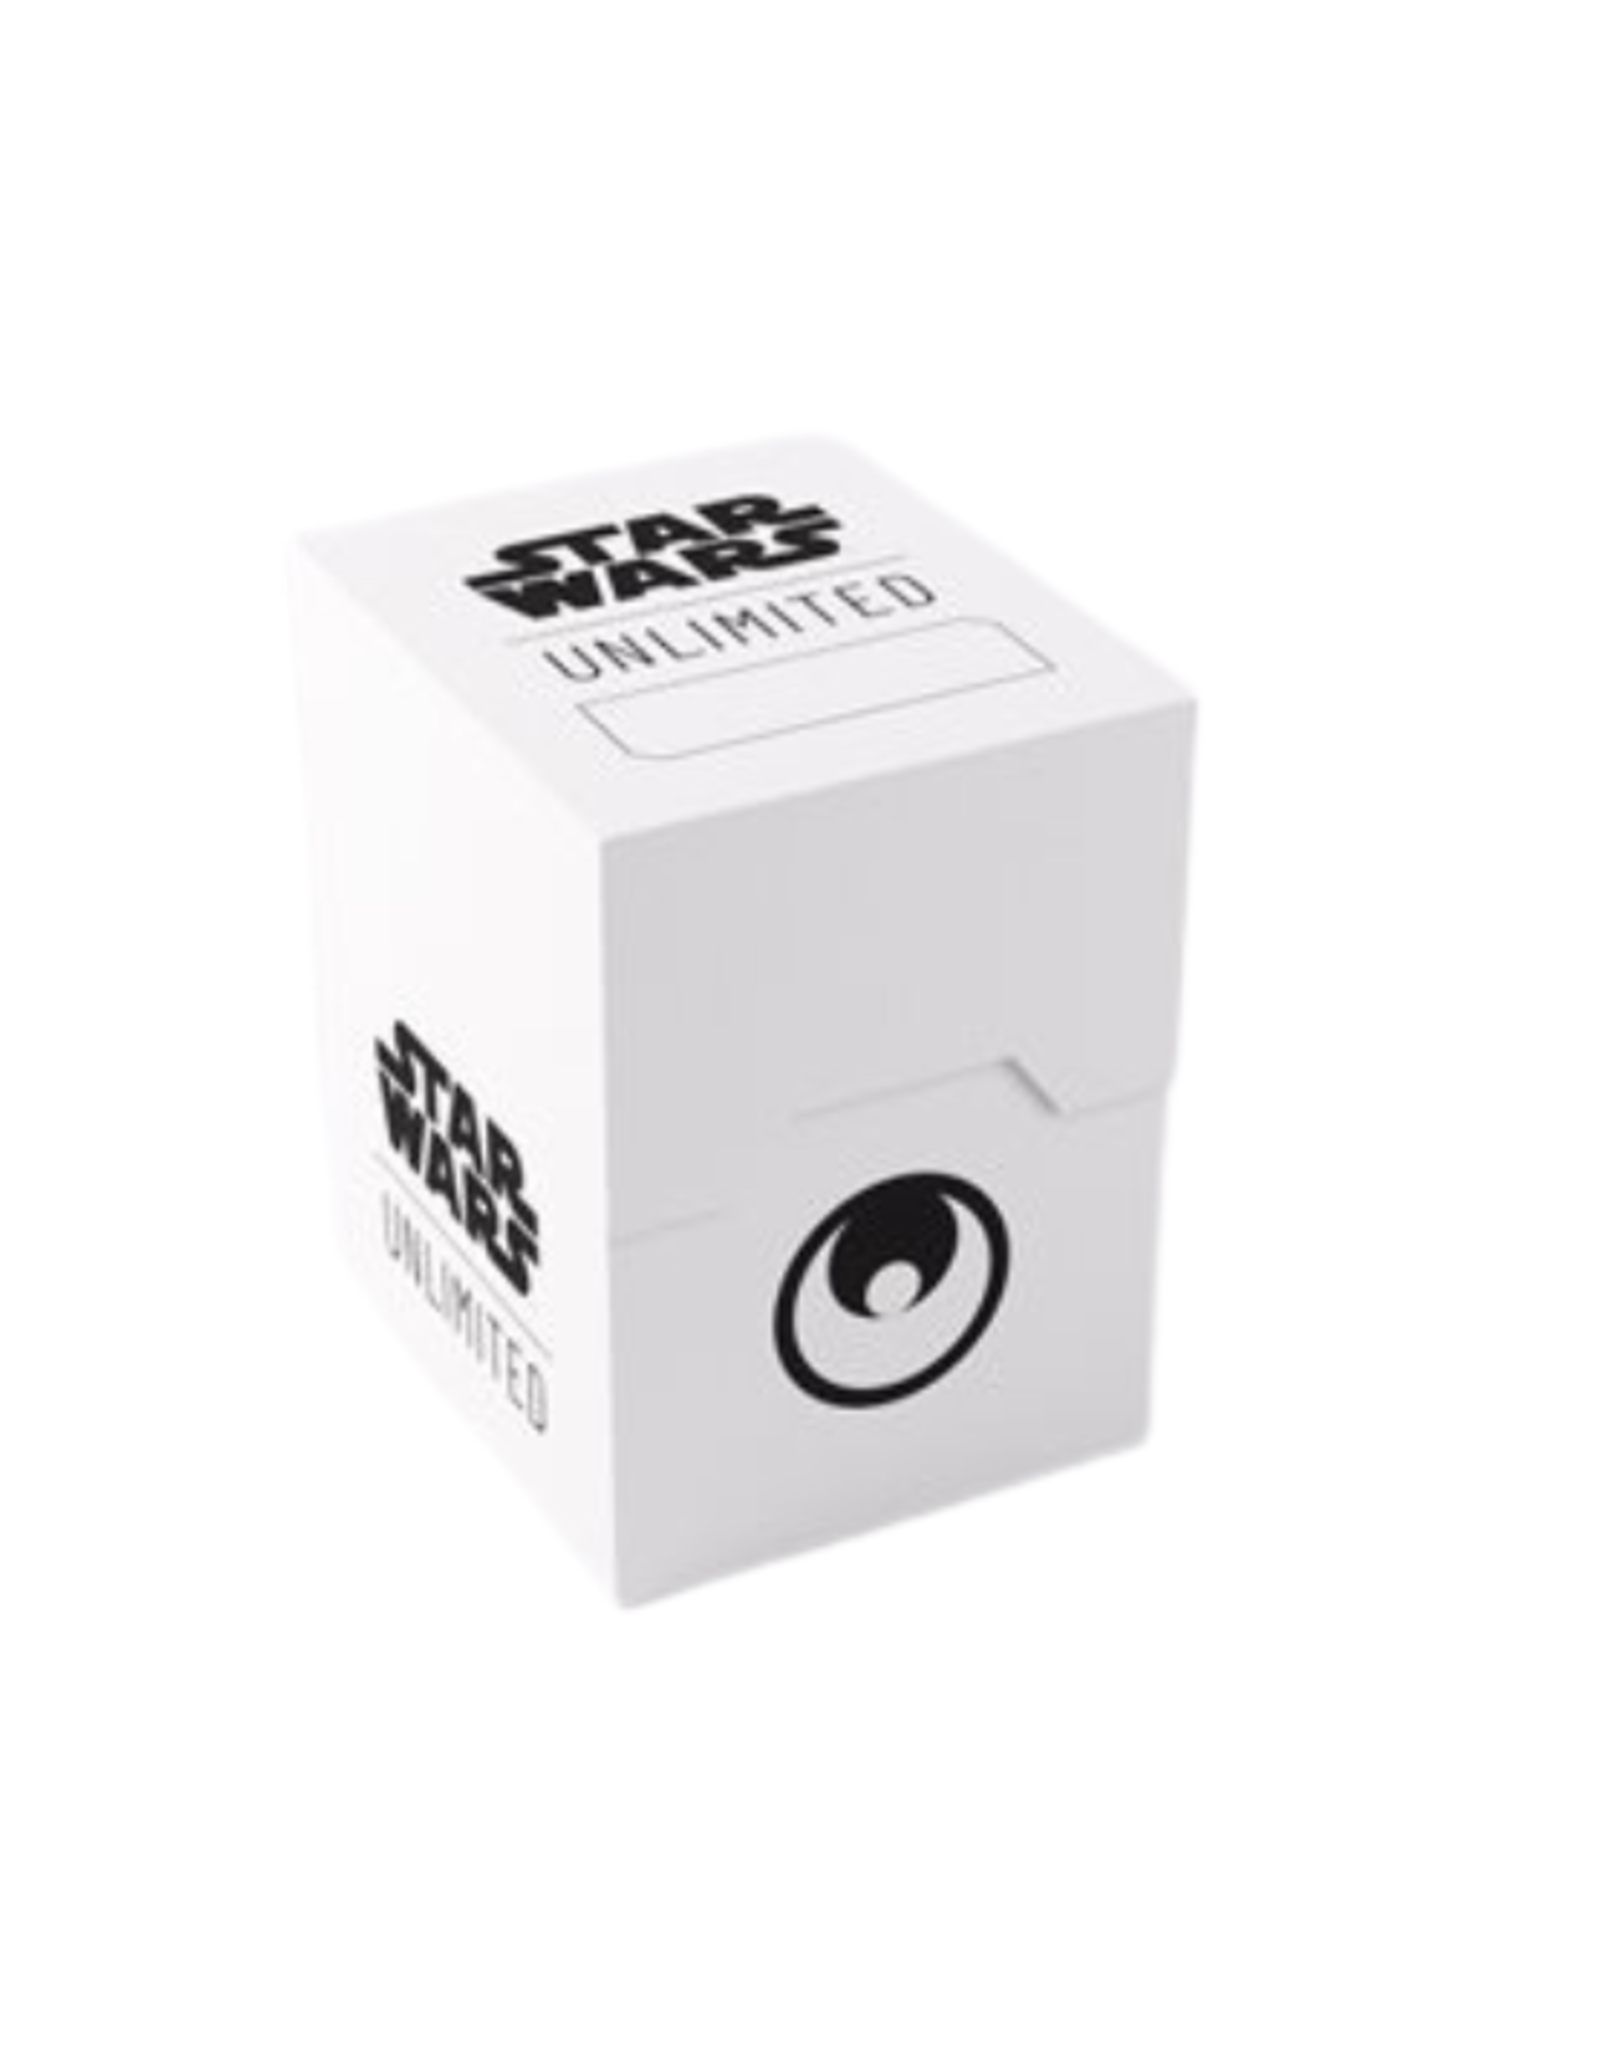 Gamegenic Gamegenic - Star Wars: Unlimited Soft Crate: White/Black